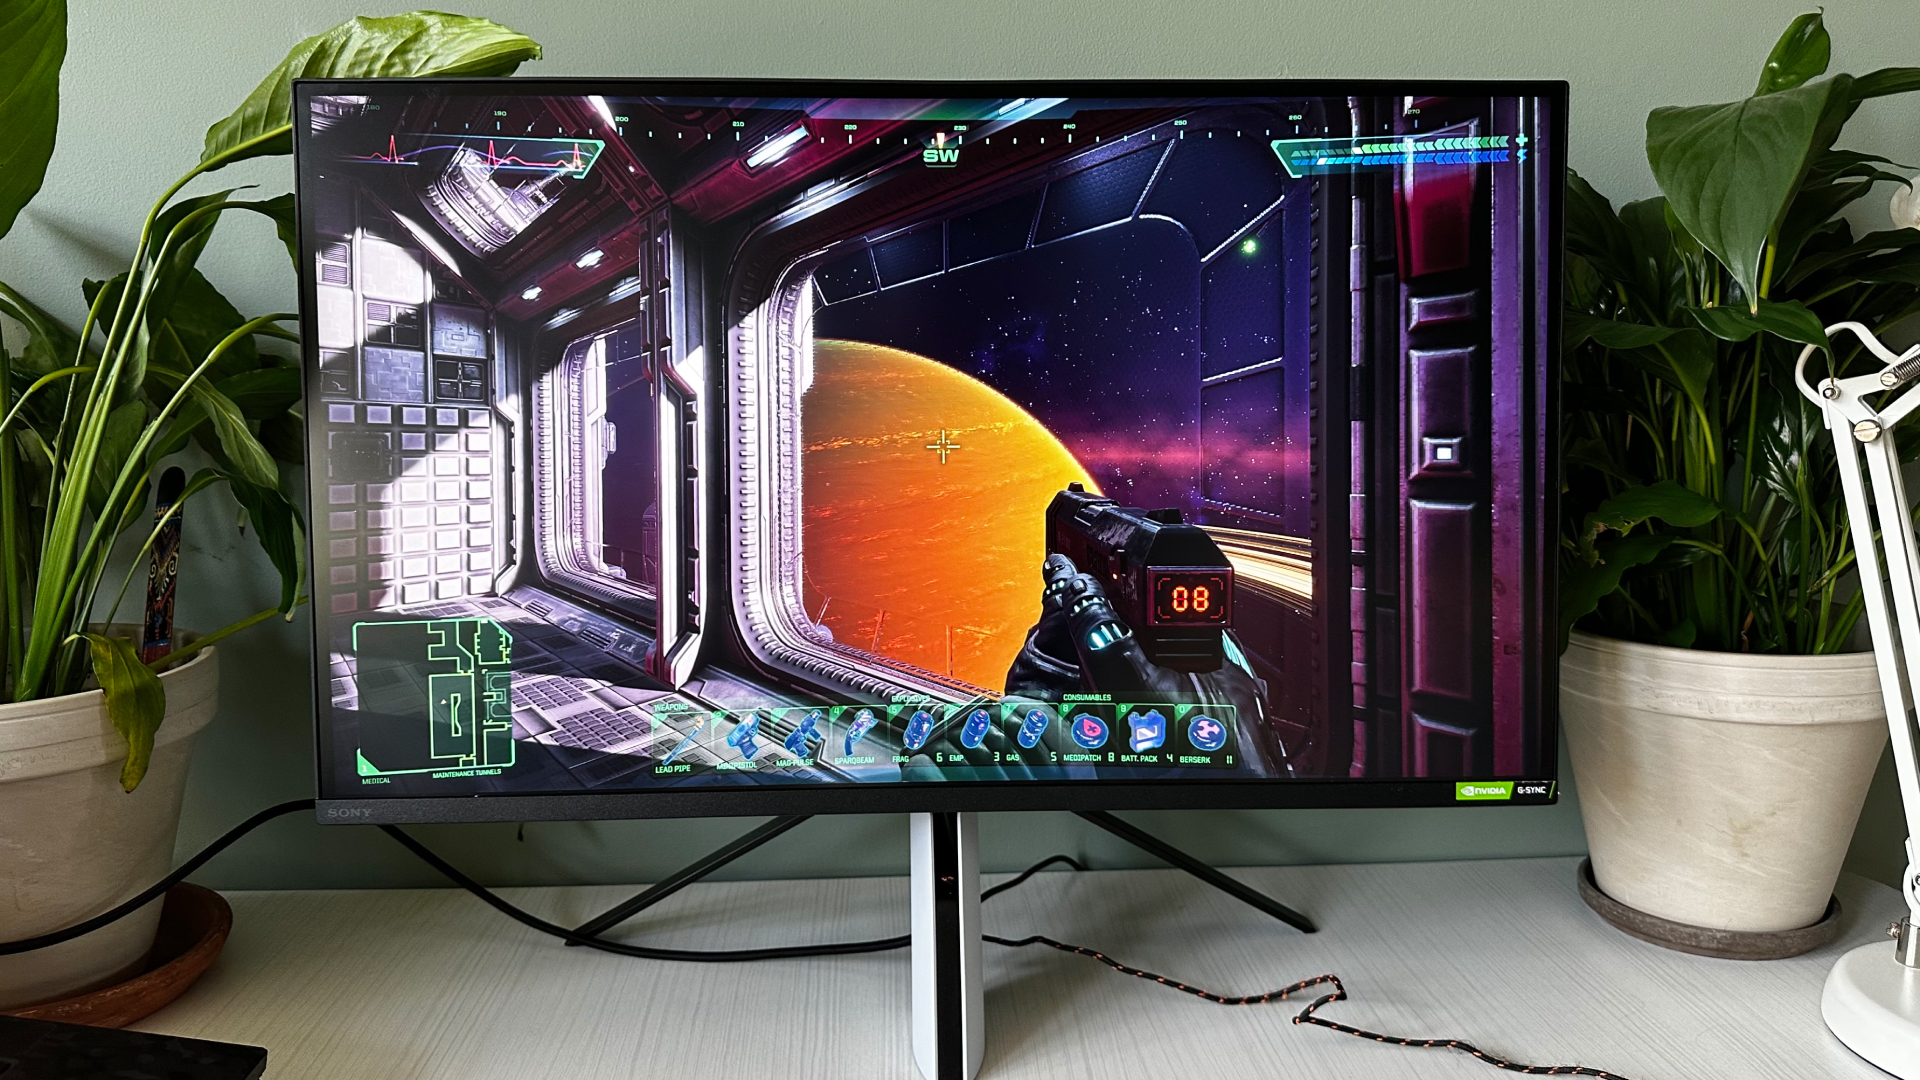 Best gaming monitor: The Sony Inzone M9 monitor set up on someone's desk.